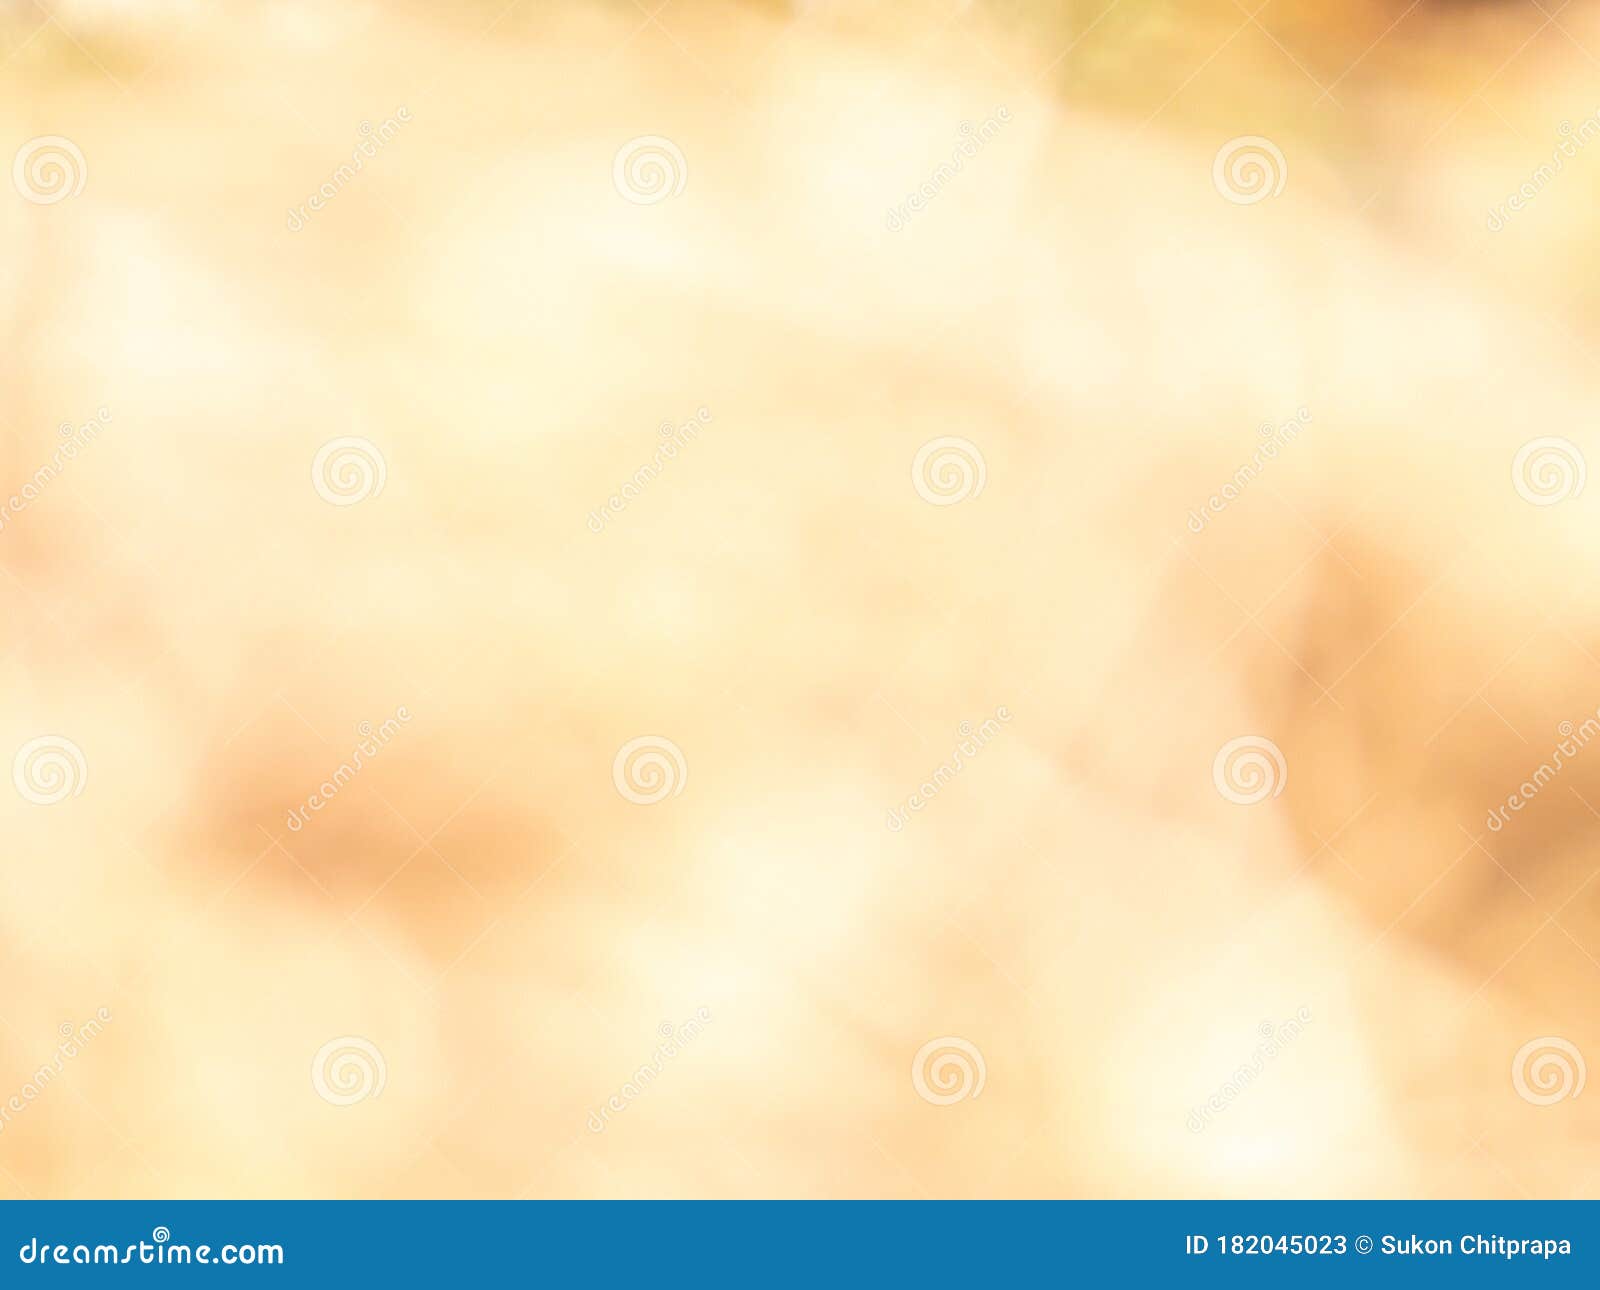 Light Brown Abstract Background Stock Illustration - Illustration of